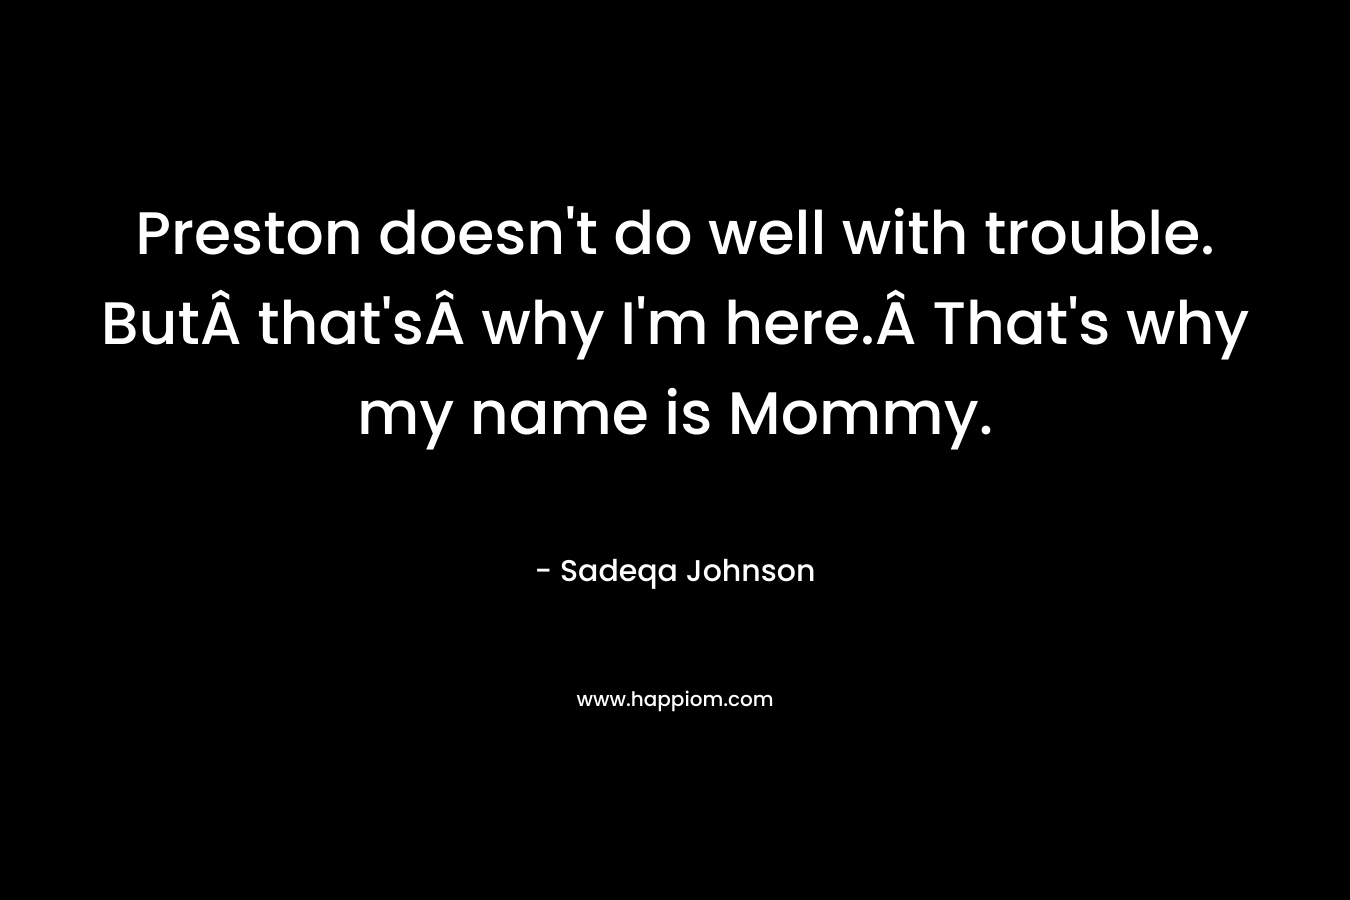 Preston doesn't do well with trouble. ButÂ that'sÂ why I'm here.Â That's why my name is Mommy.